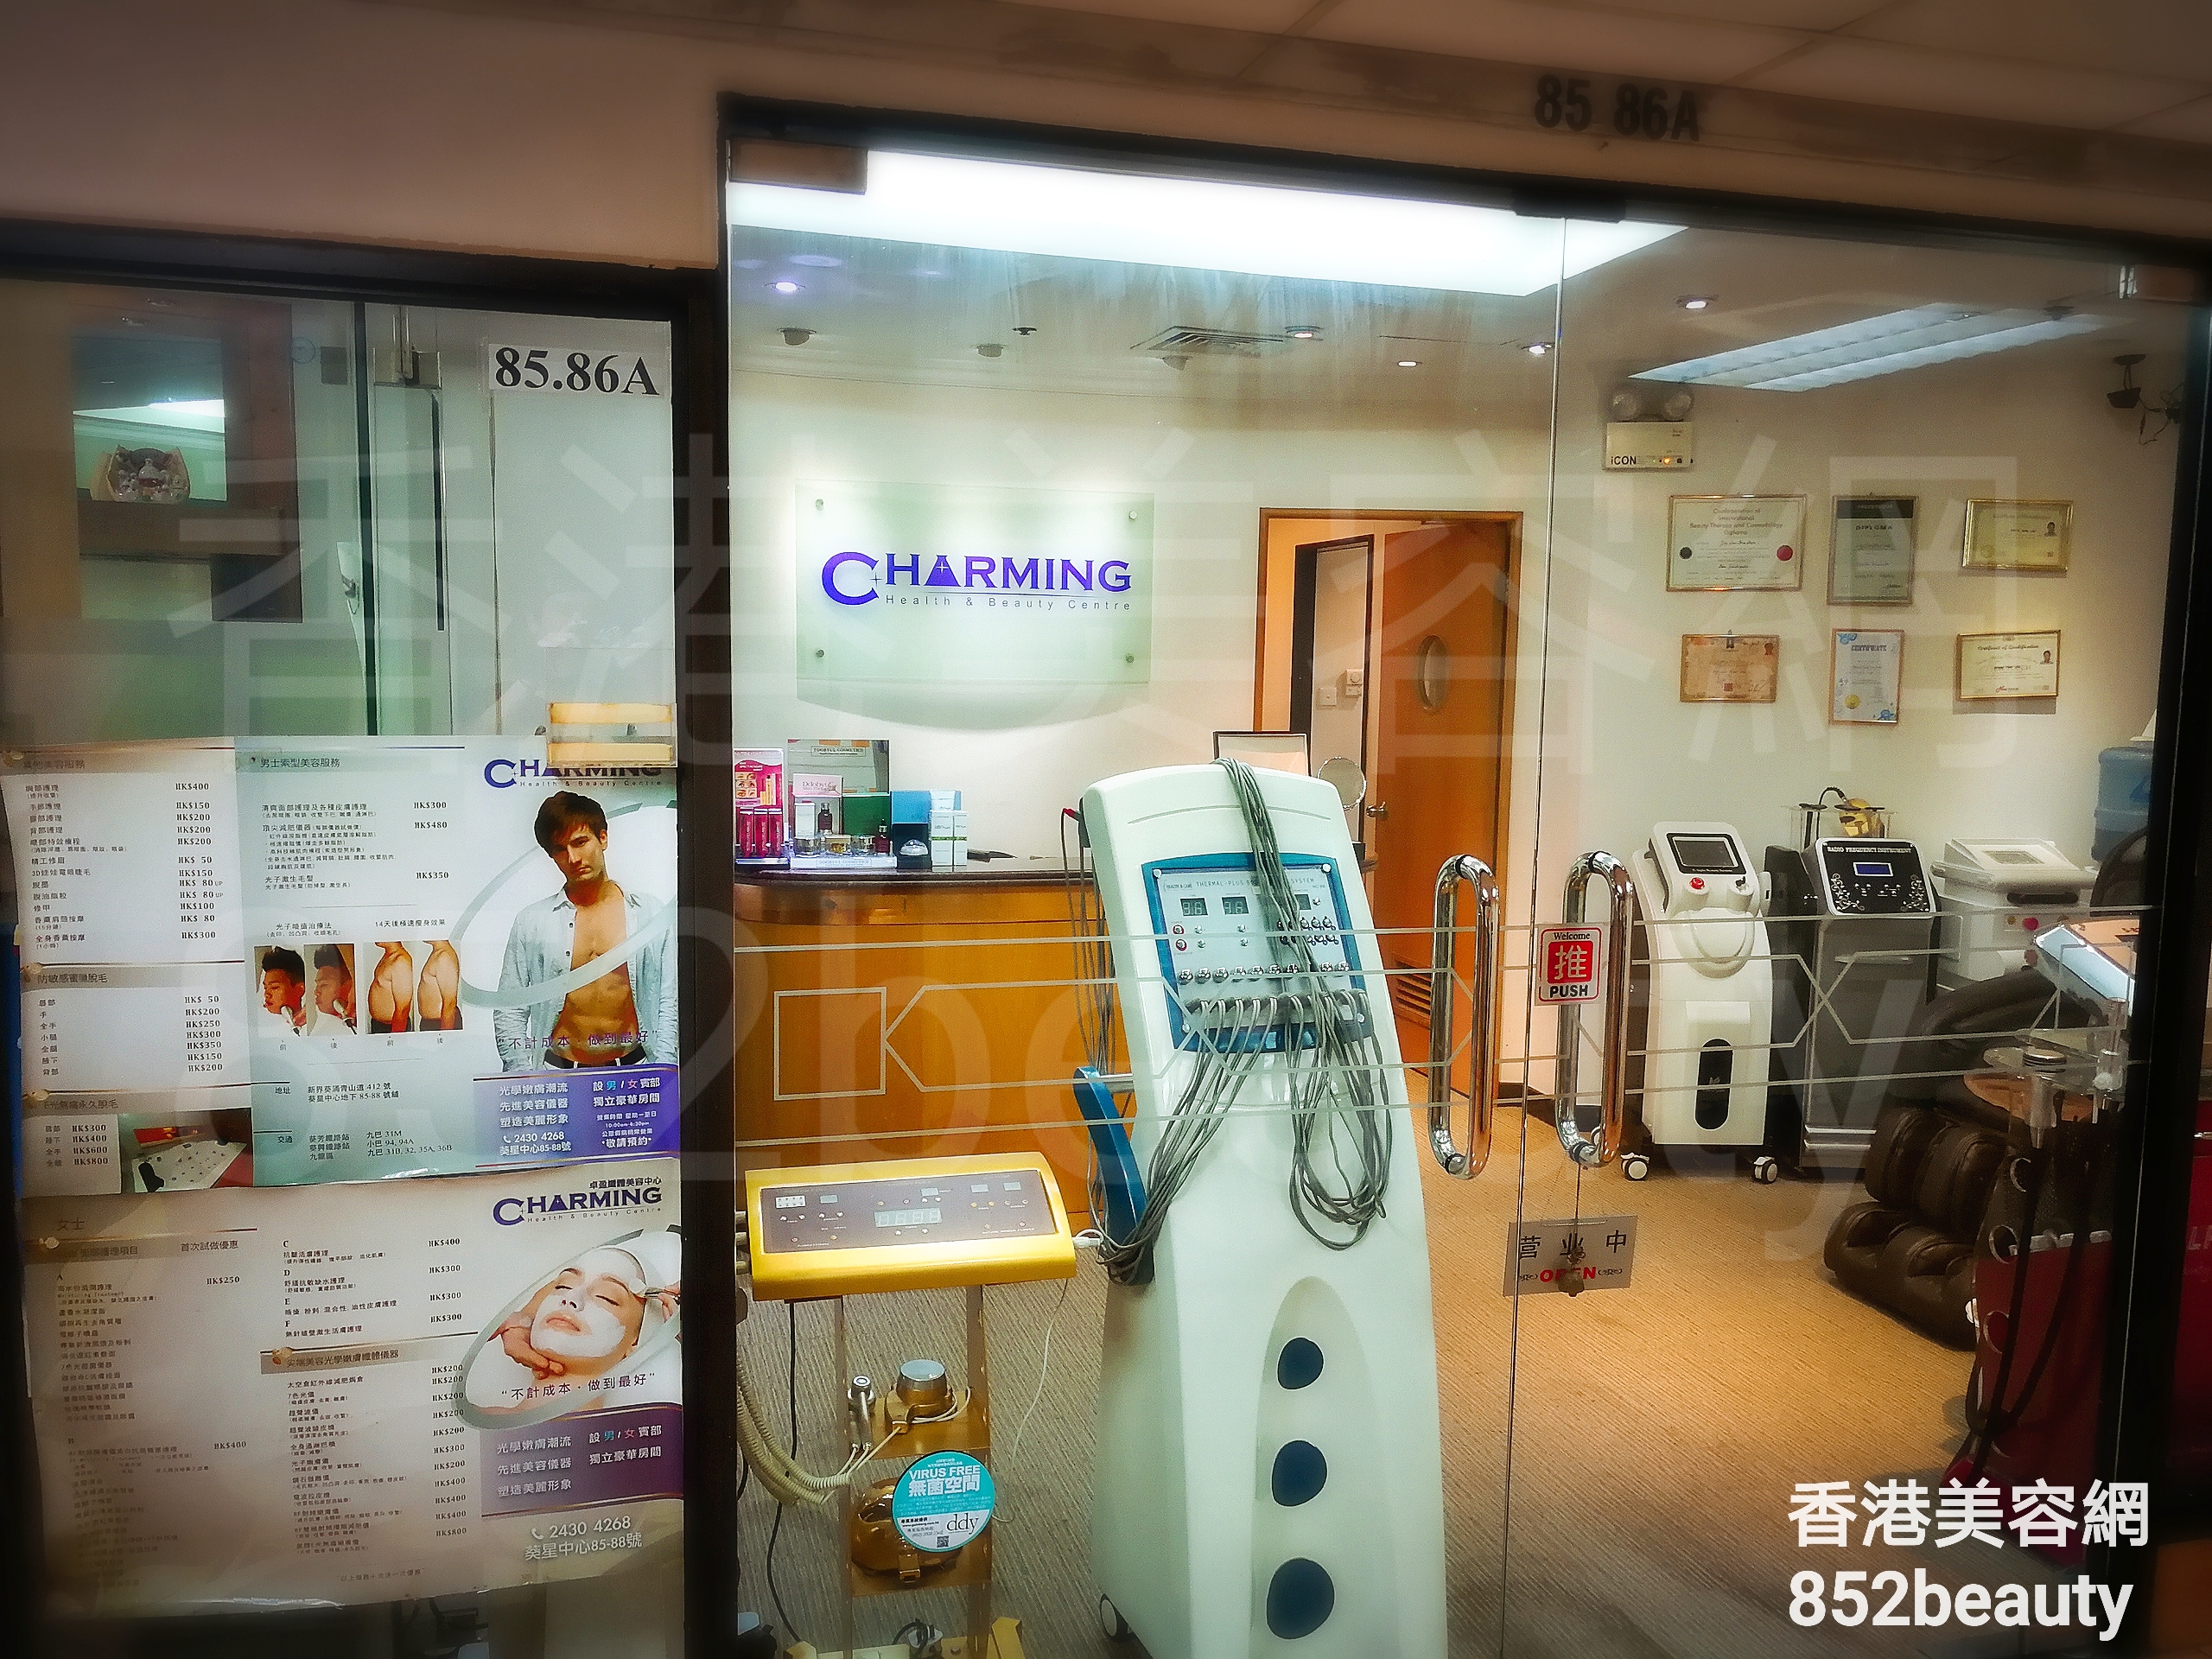 Men Grooming: Charming Health & Beauty Centre